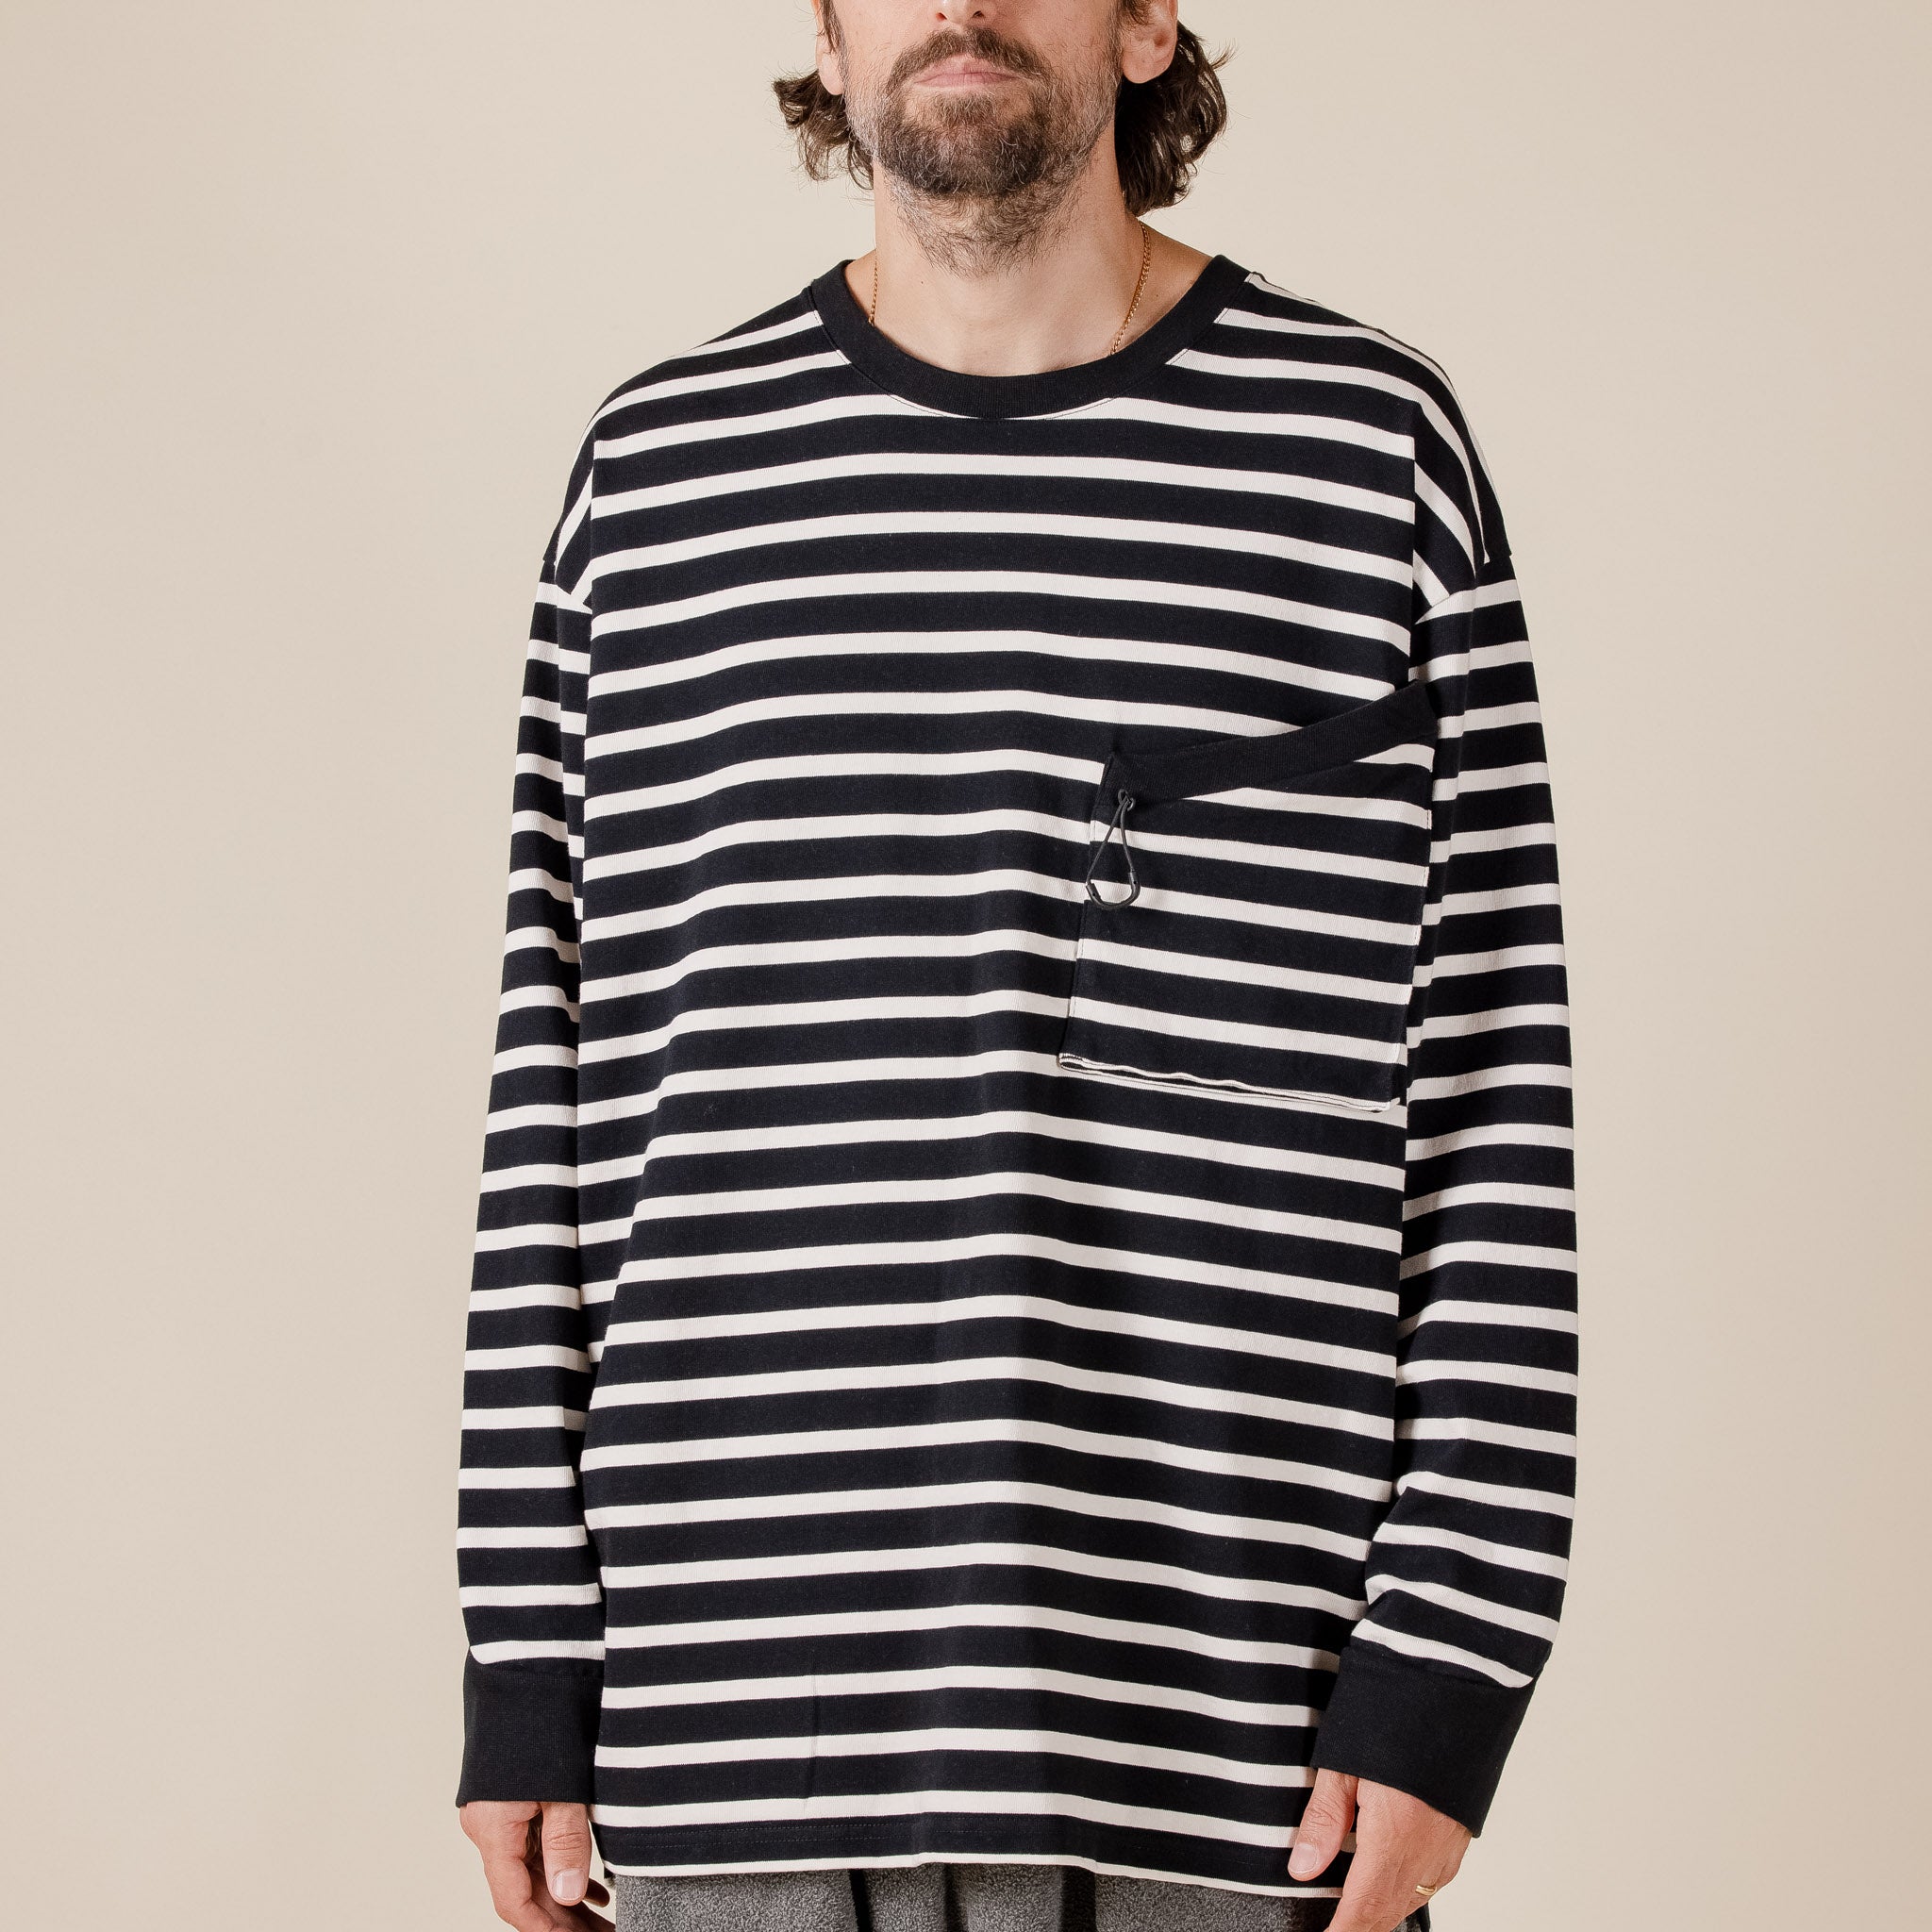 CMF Comfy Outdoor Garment - Heavy Cotton L/S Border T-Shirt - Black & White "cmf outdoor garment stockists" "cmf stockists" ":CMF Japan" "lost hills store Japan" "lost hills store Tokyo"